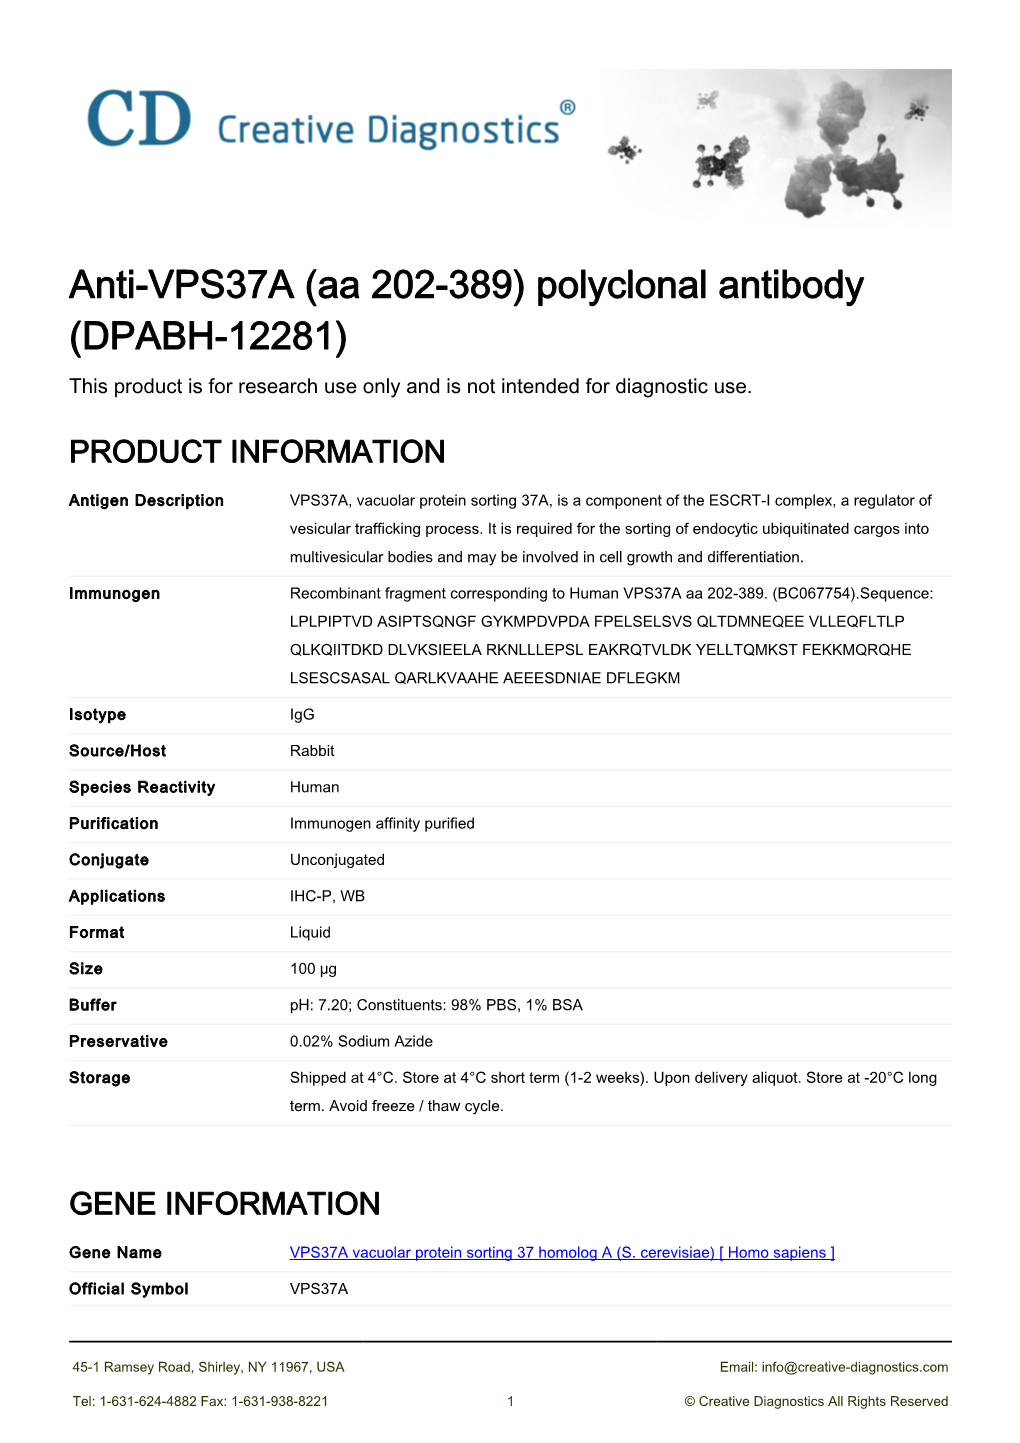 Anti-VPS37A (Aa 202-389) Polyclonal Antibody (DPABH-12281) This Product Is for Research Use Only and Is Not Intended for Diagnostic Use